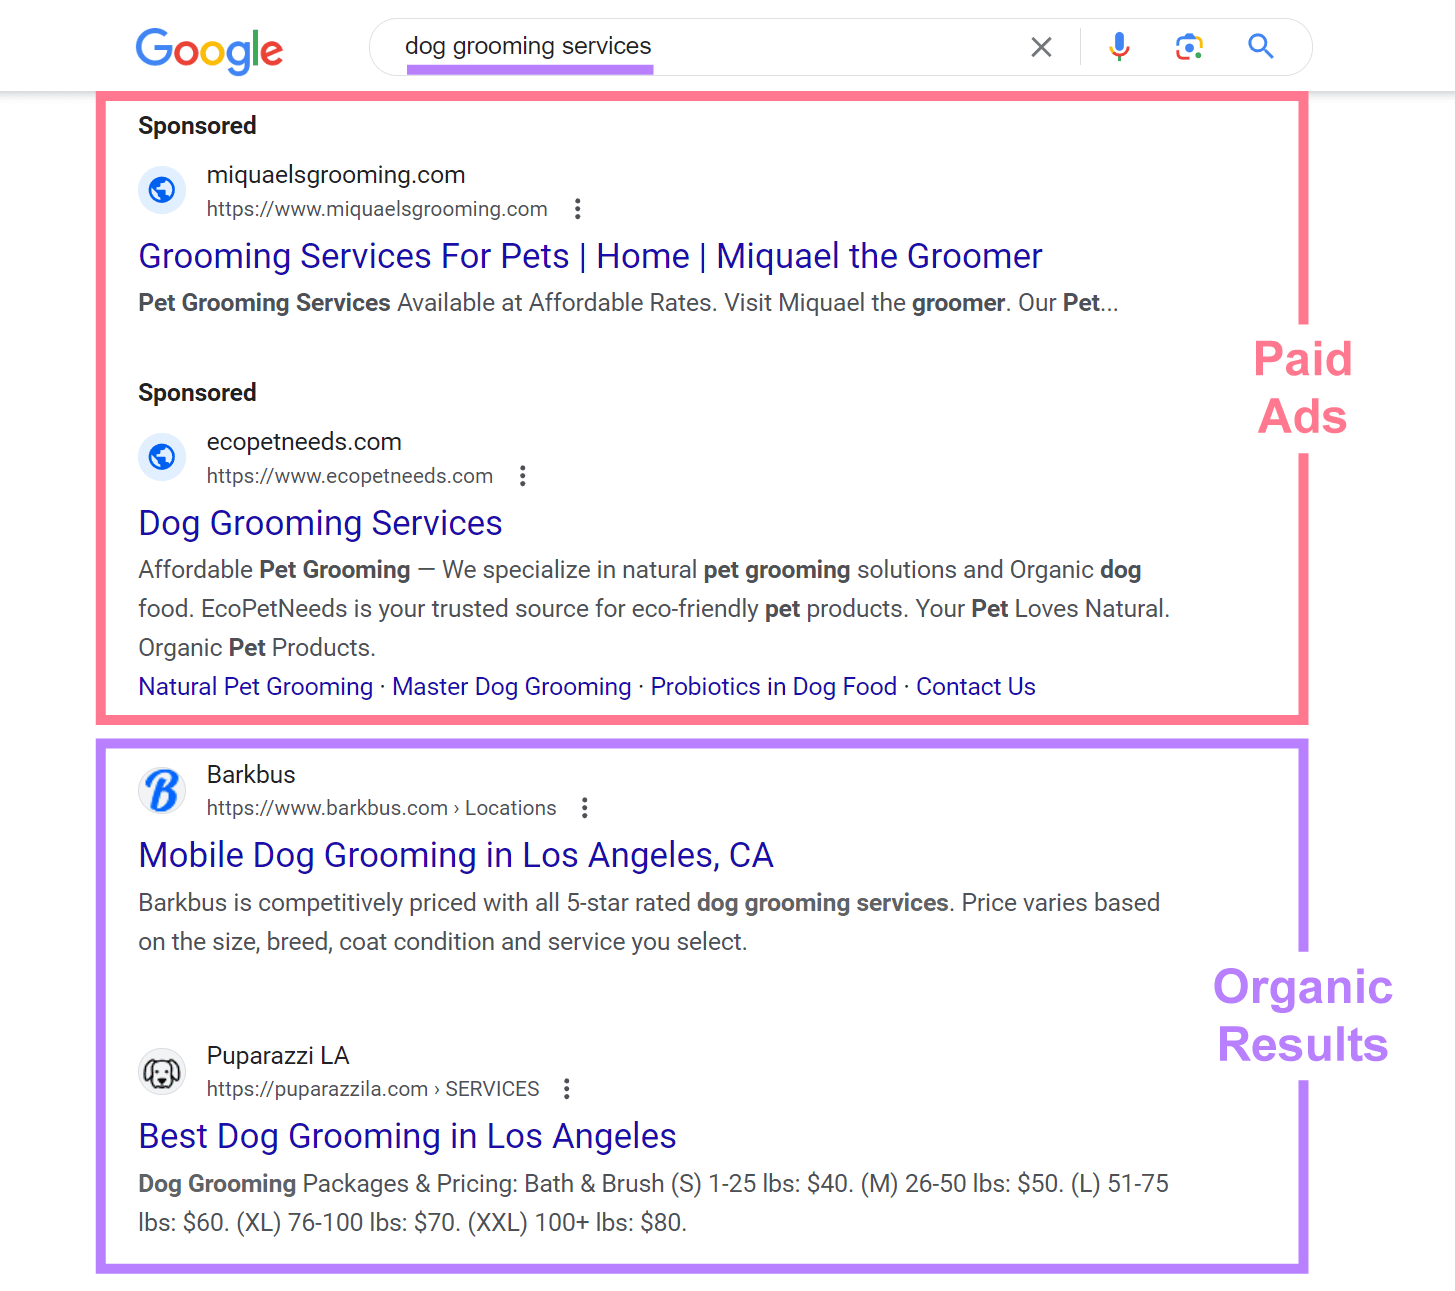 Paid ads and organic results on Google SERP for "dog grooming services" query